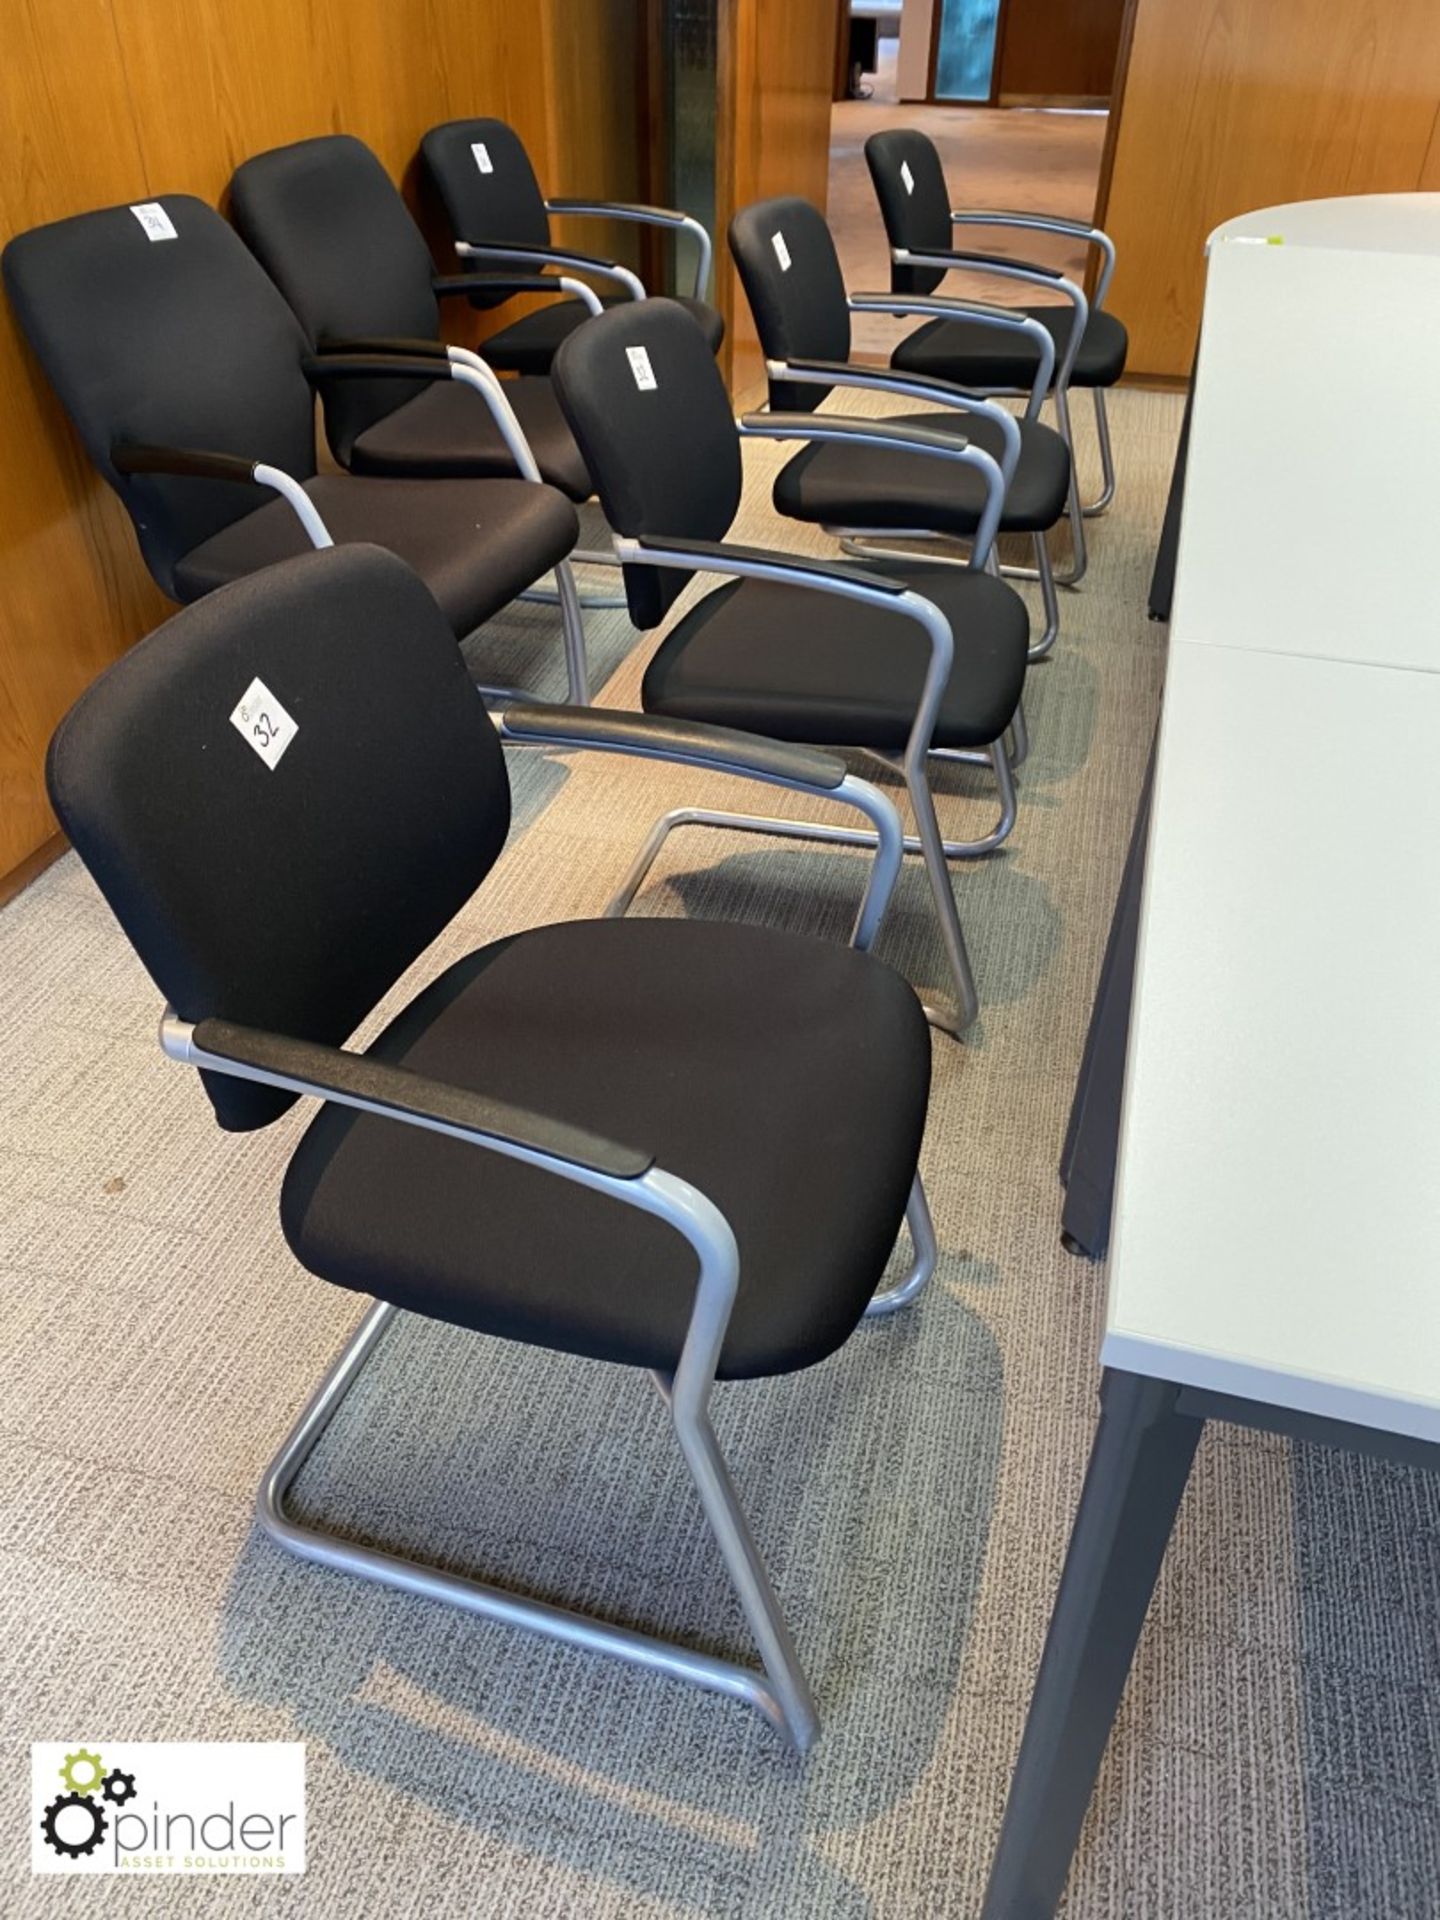 Set 4 upholstered cantilever Meeting Chairs, black (located in Meeting Room 9 on 23rd Floor)